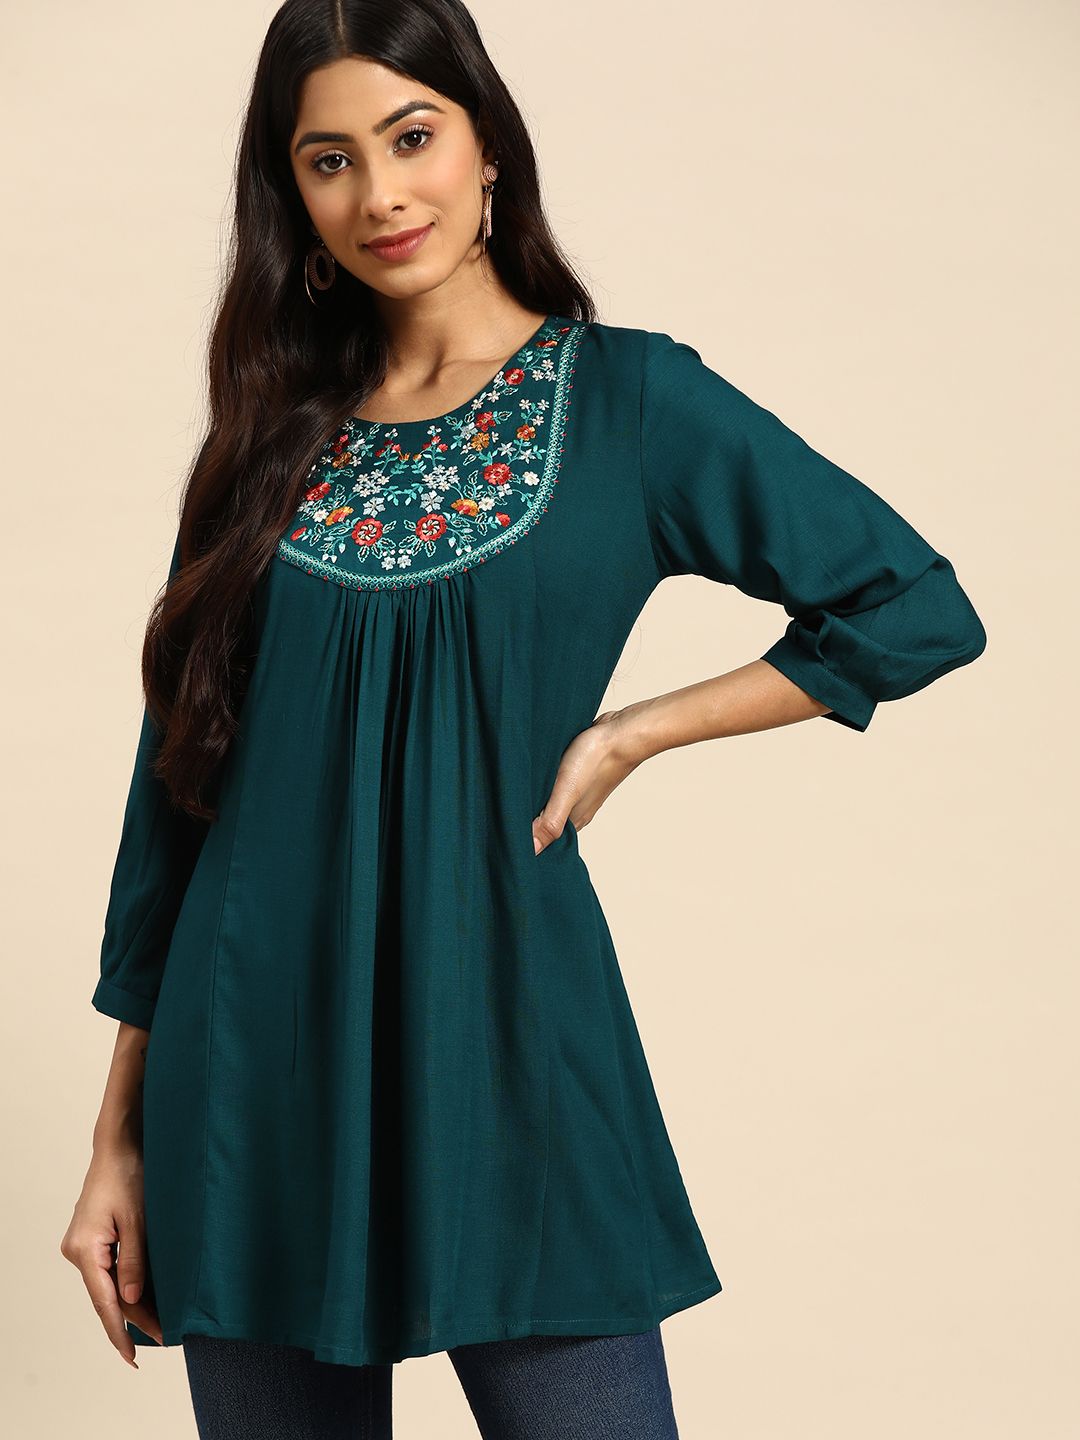 all about you Teal Floral Embroidered Longline Top Price in India